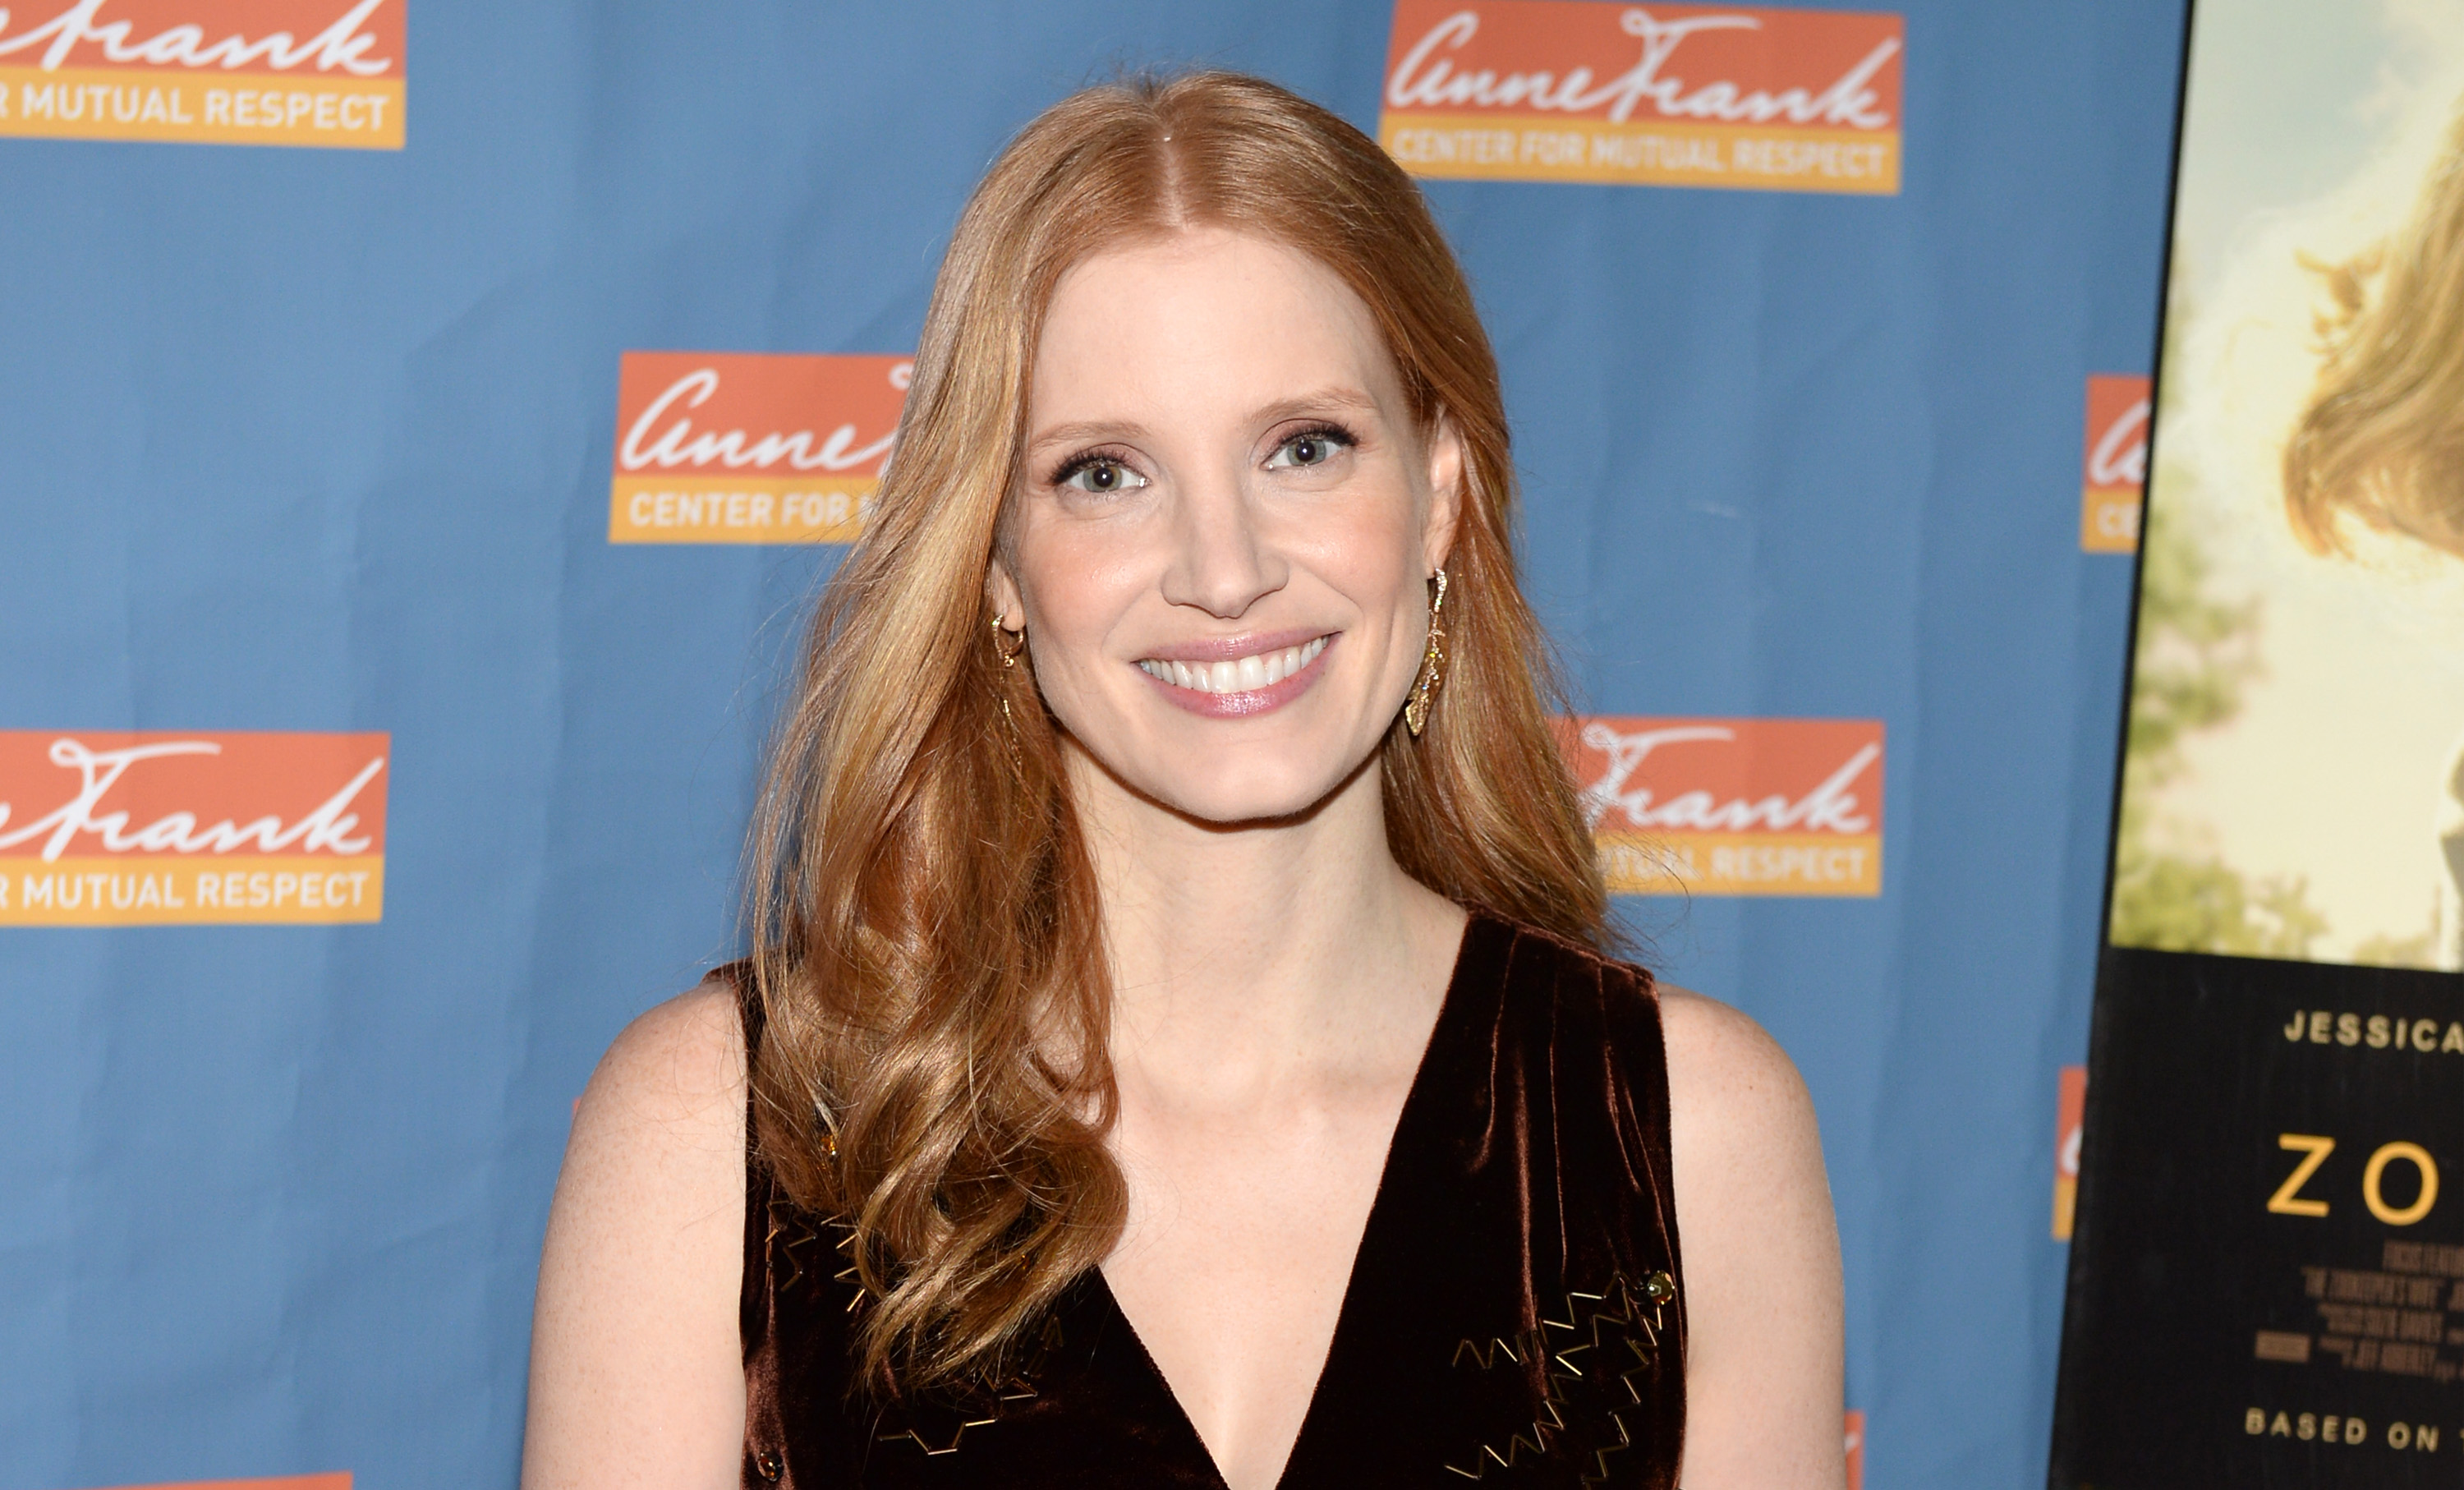 Jessica Chastain attends "The Zookeeper's Wife" special screening at Regal Union Square on March 19, 2017 in New York City.  (Photo by Andrew Toth/FilmMagic) (Andrew Toth&mdash;FilmMagic)